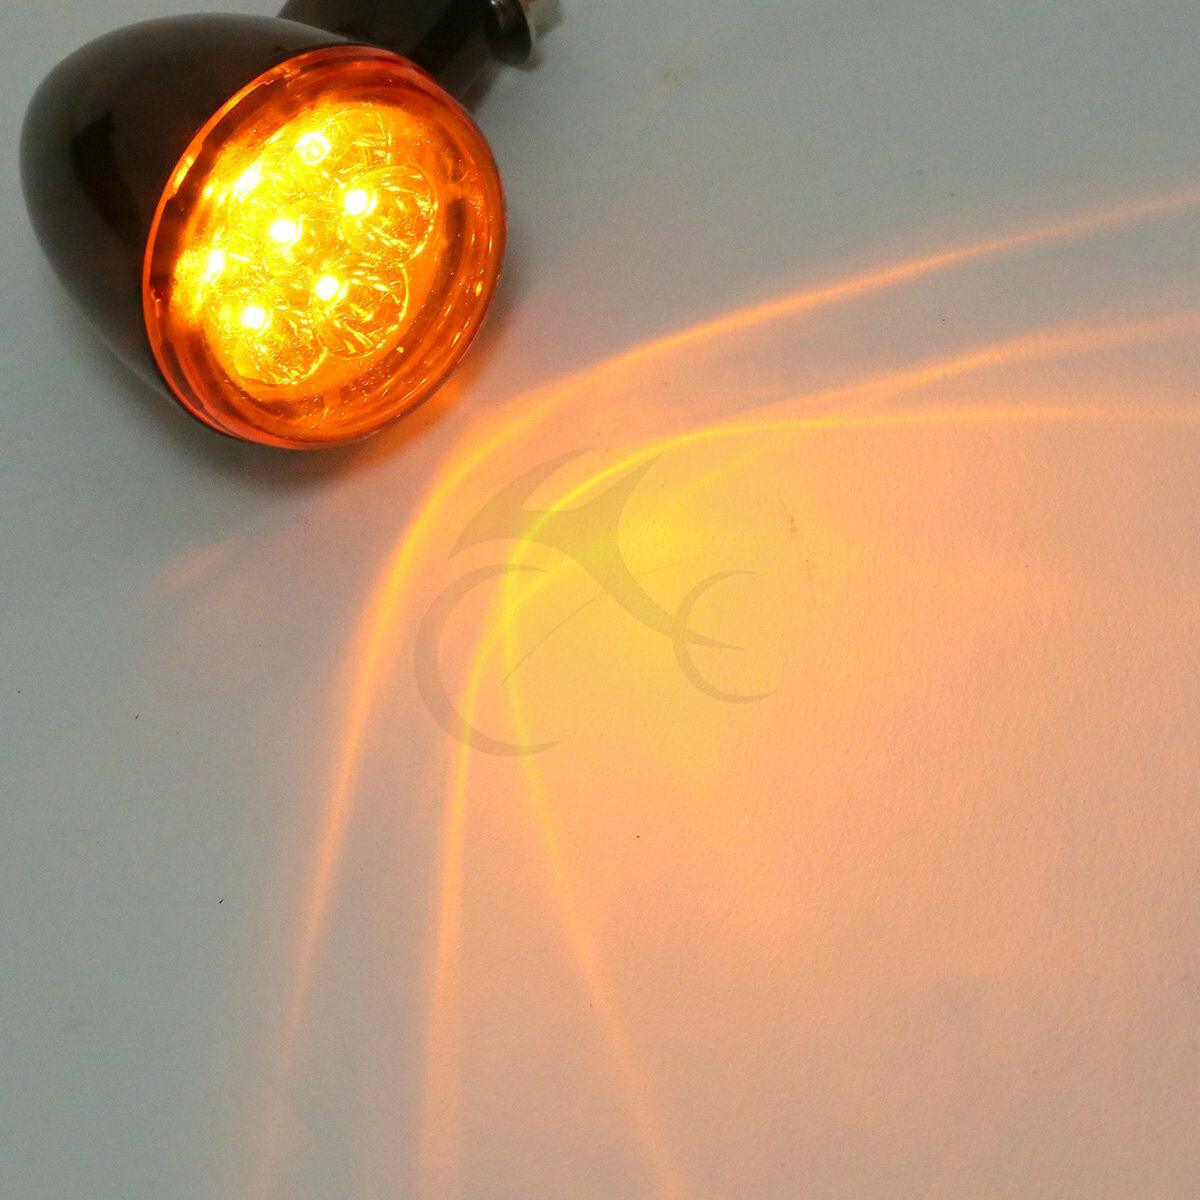 LED Rear Turn Signal Light Indicator Fit For Harley XL883 XL1200 Sportster 92-17 - Moto Life Products